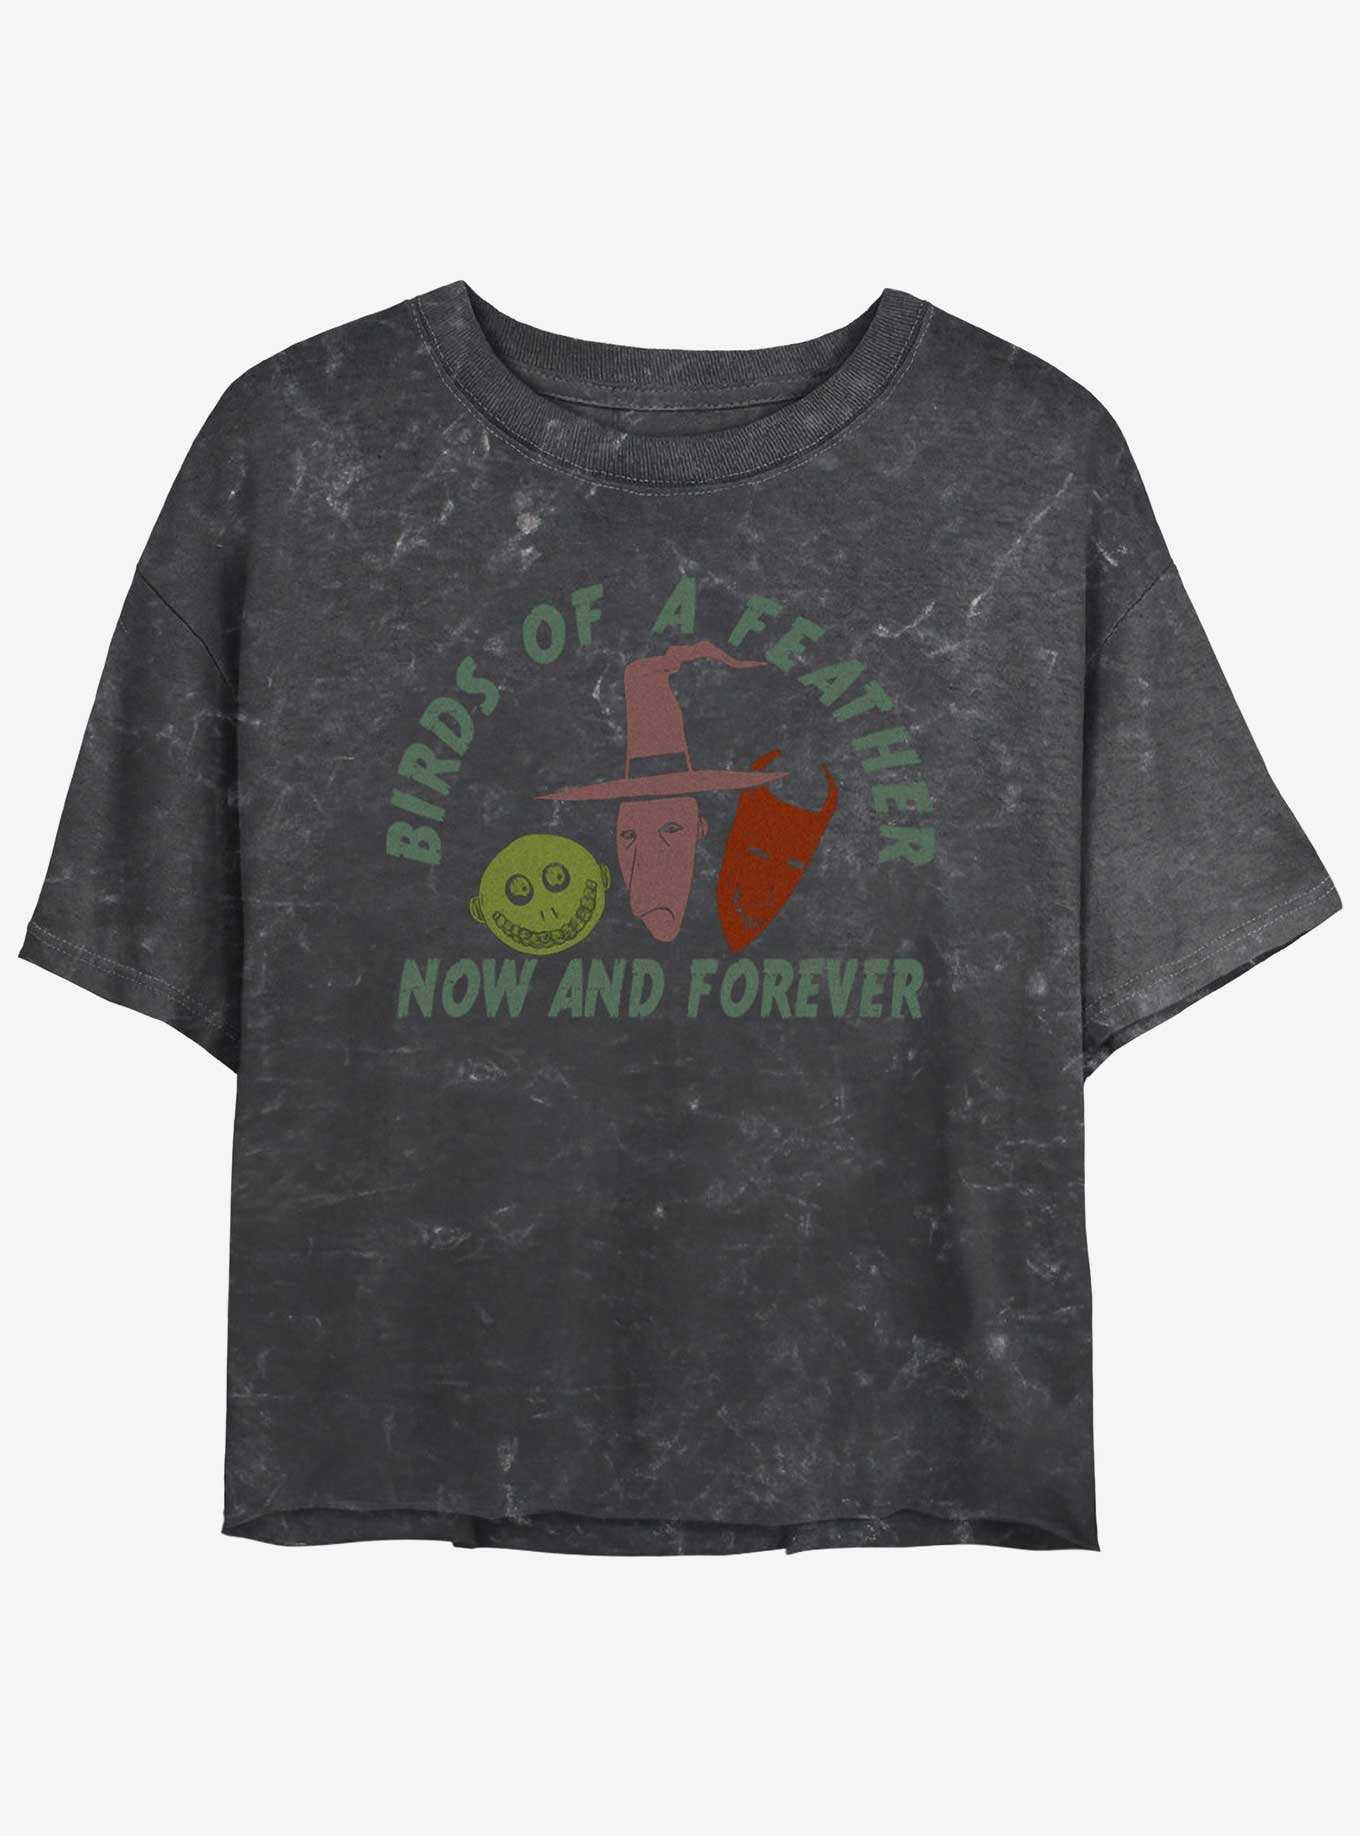 Disney The Nightmare Before Christmas Now and Forever Lock, Shock, & Barrel Mineral Wash Girls Crop T-Shirt, , hi-res